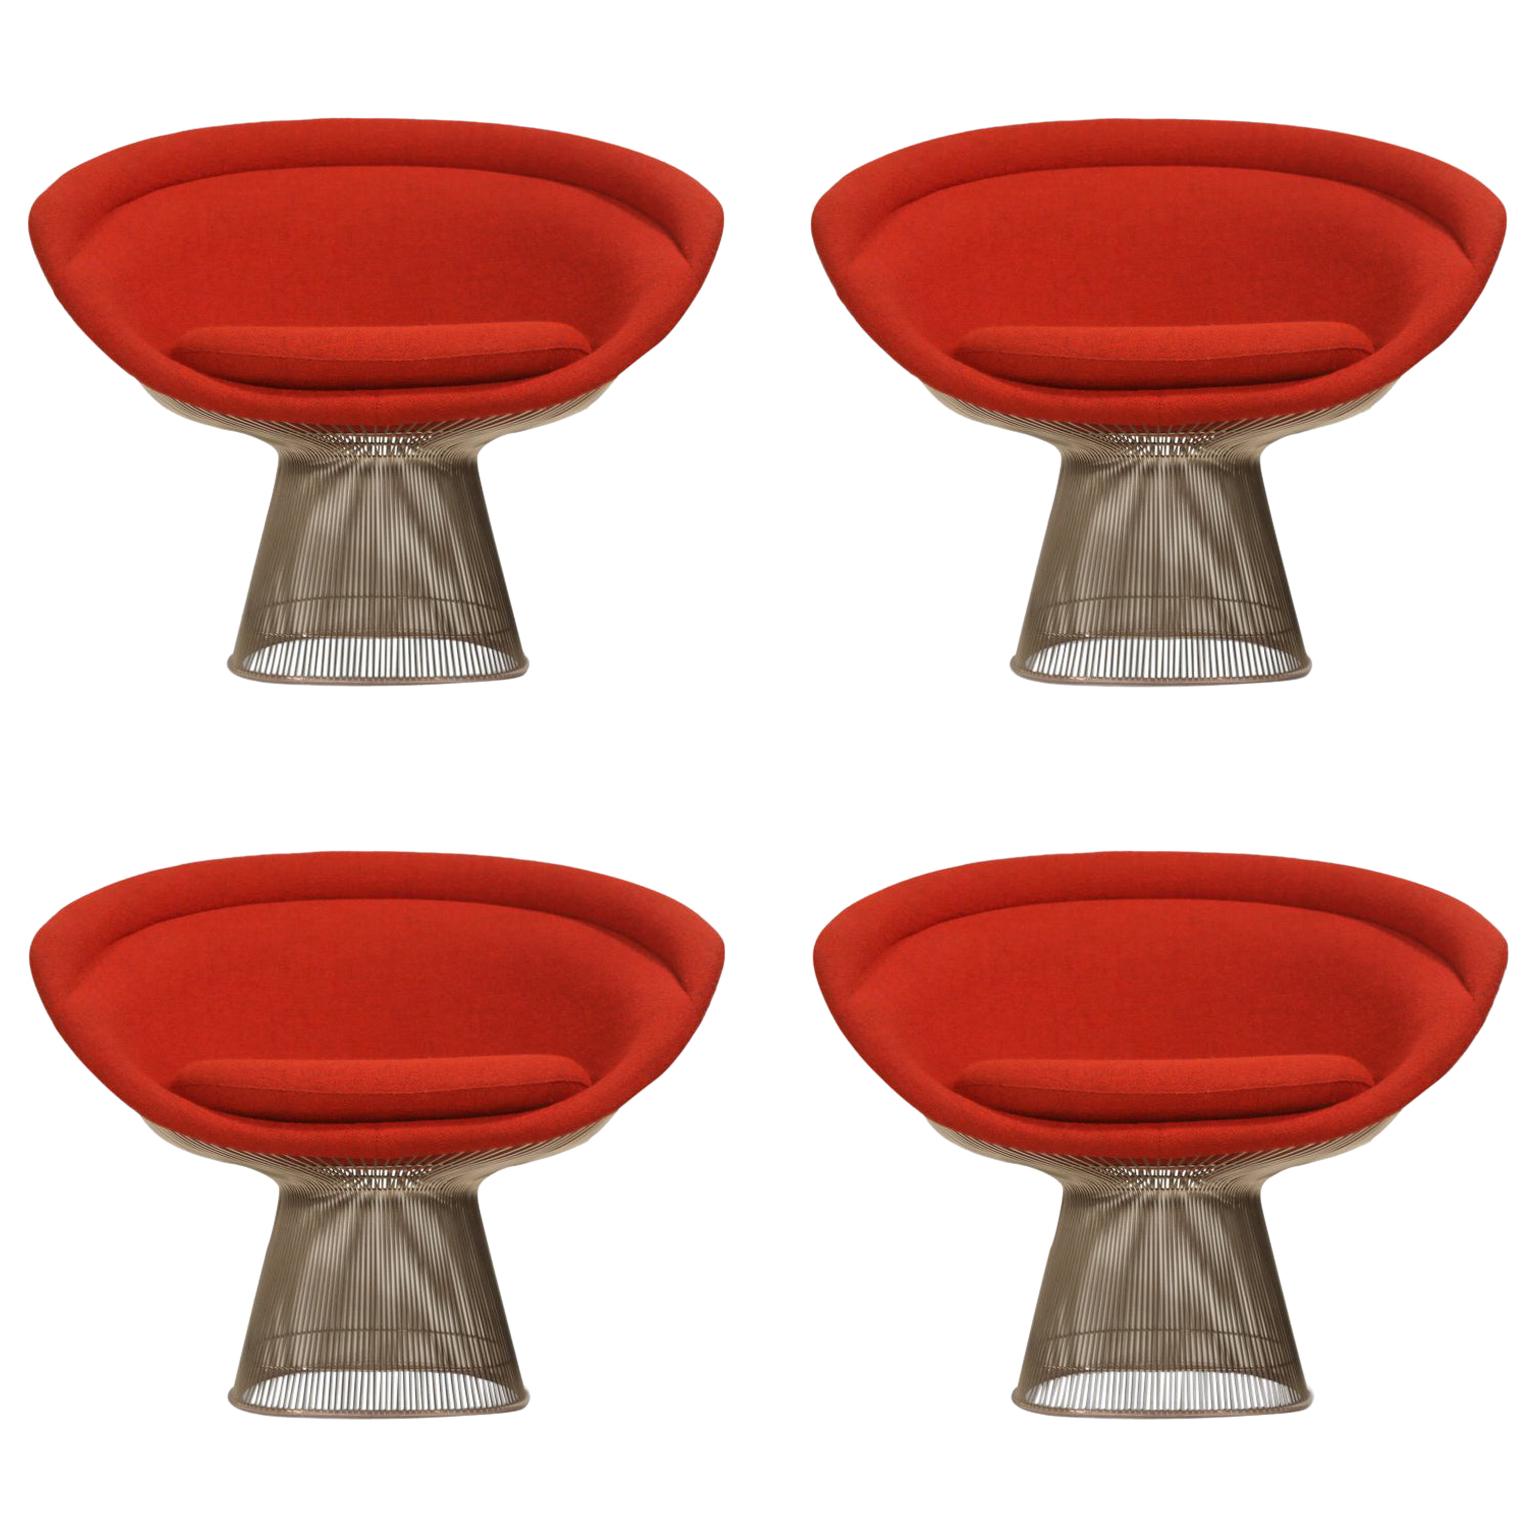 Warren Platner for Knoll Lounge Chairs in Red Wool Boucle